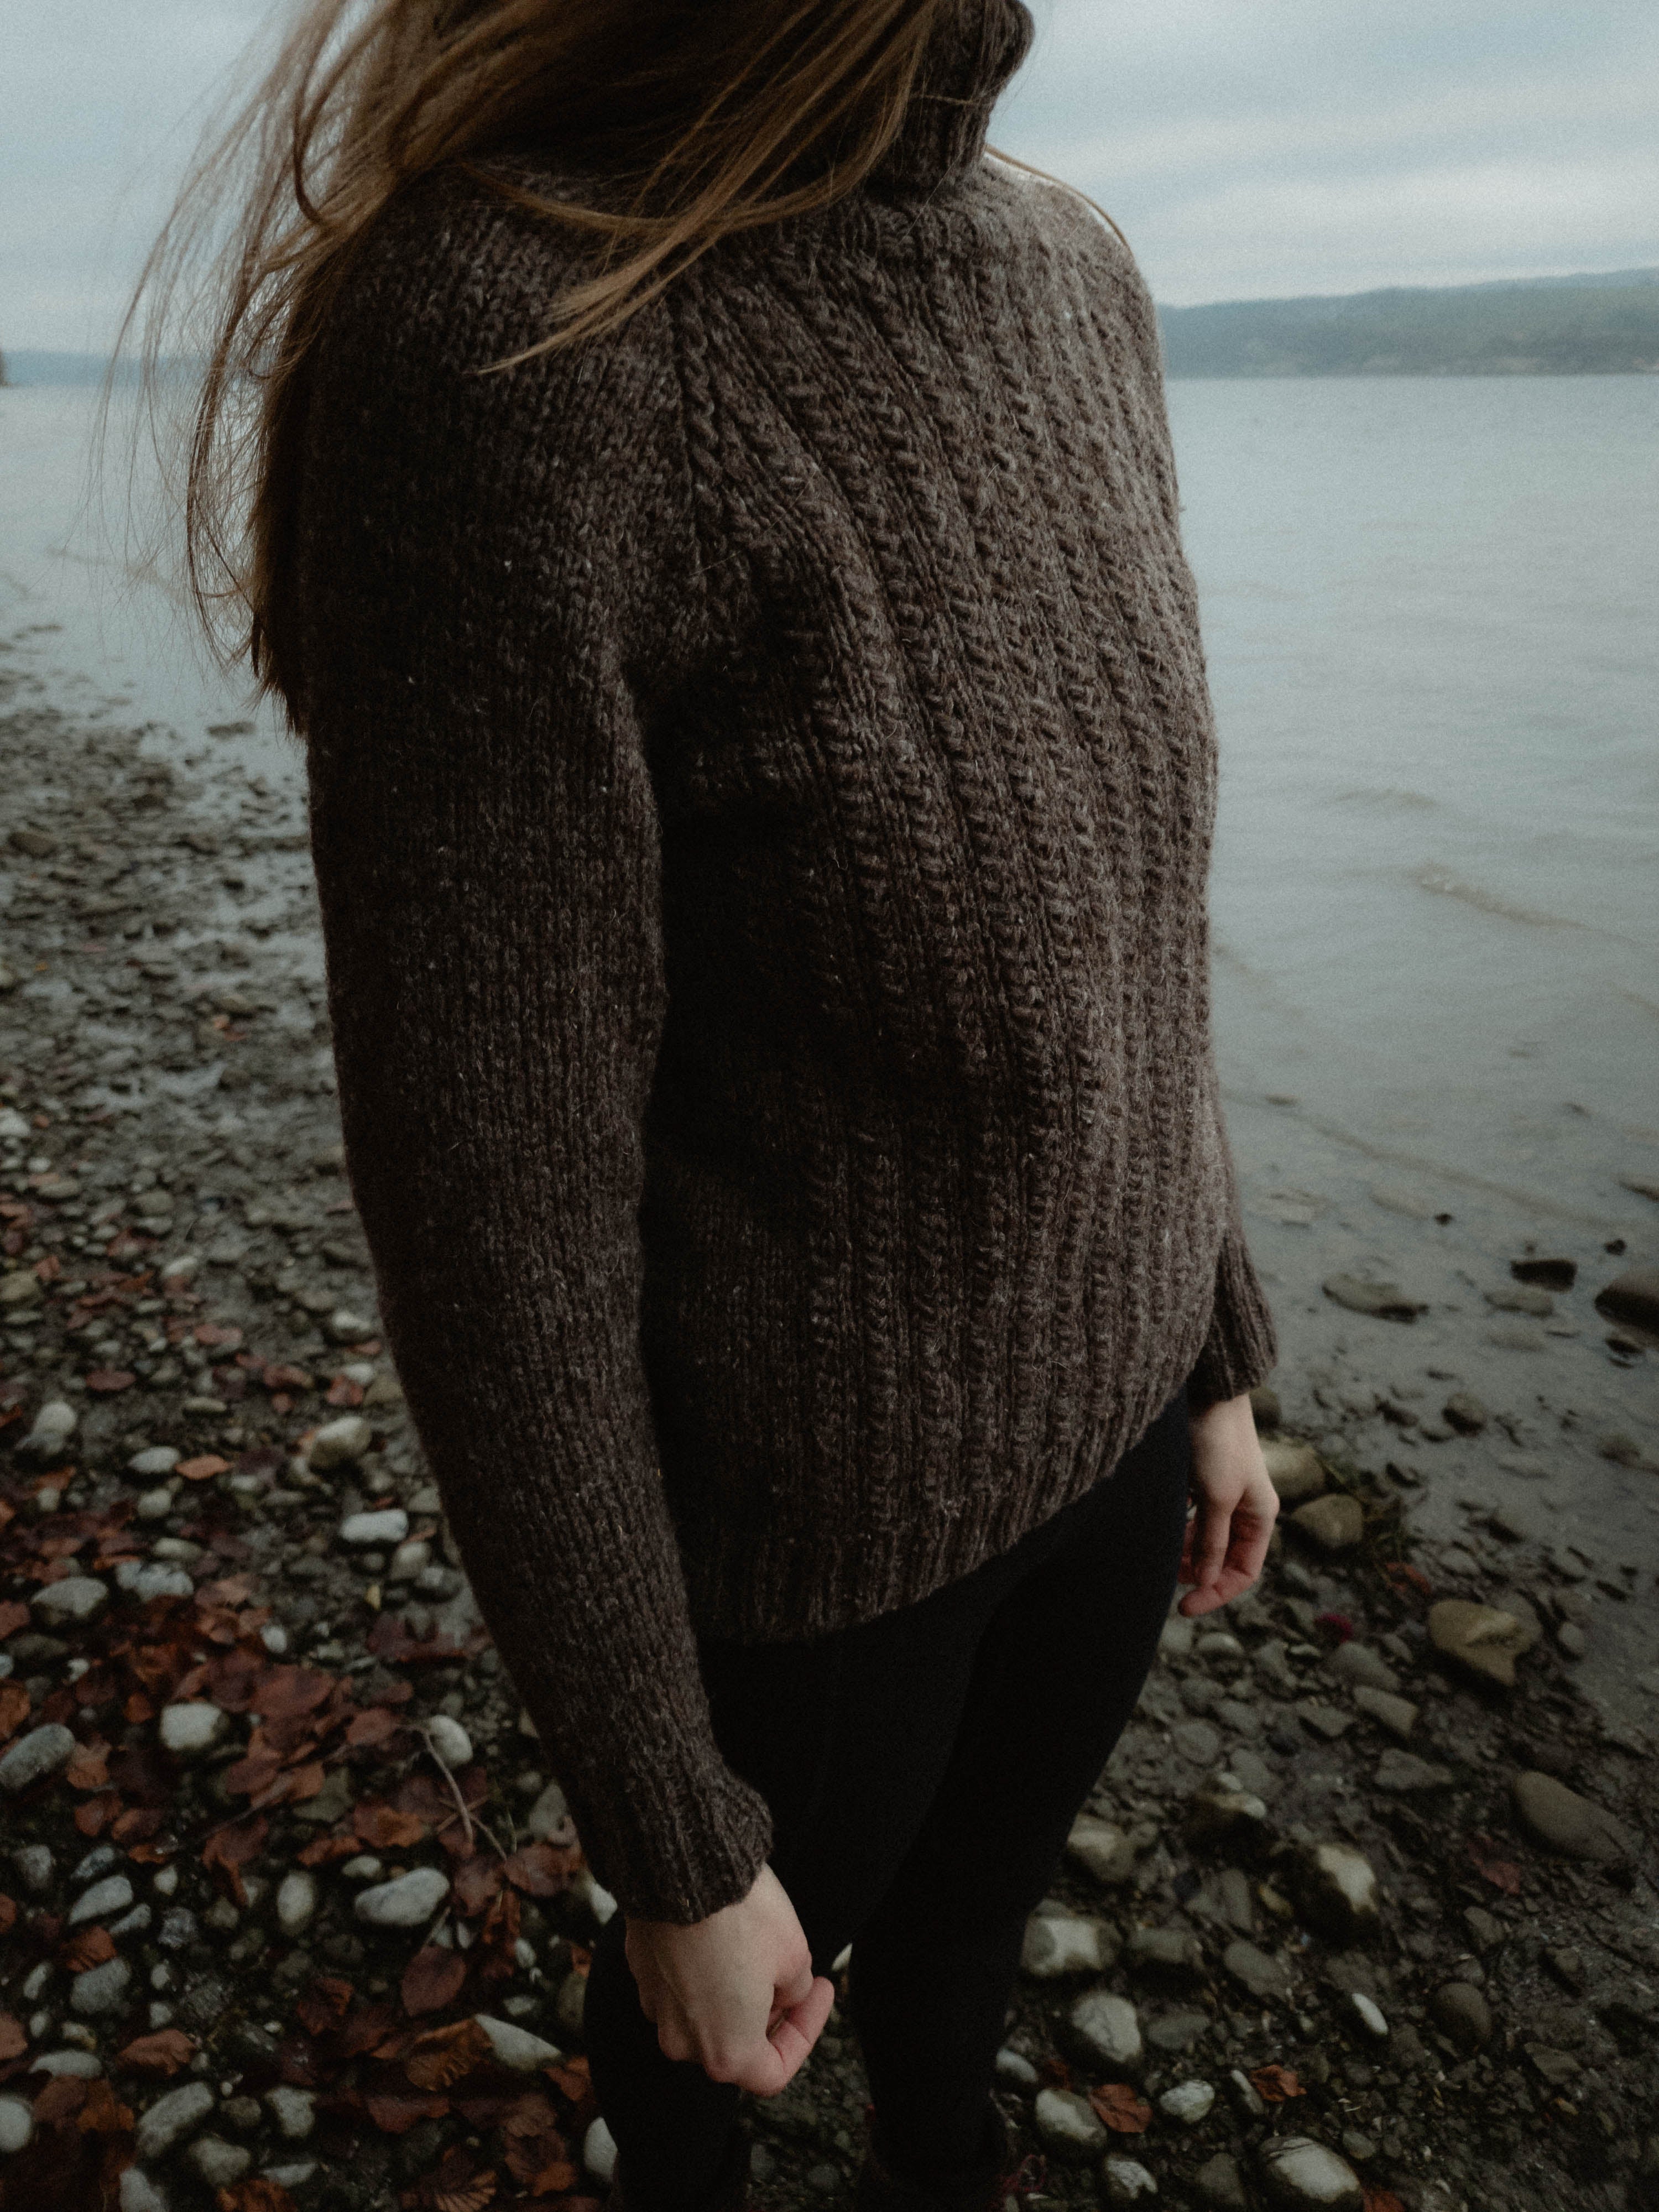 Image of knitwear designer Lív Ulven wearing a natural dark grey Fisherman's Raglan sweater with textured front, handknit in Manchelopi unspun yarn, standing on a stony beach. The backdrop showcases a foggy large body of water.